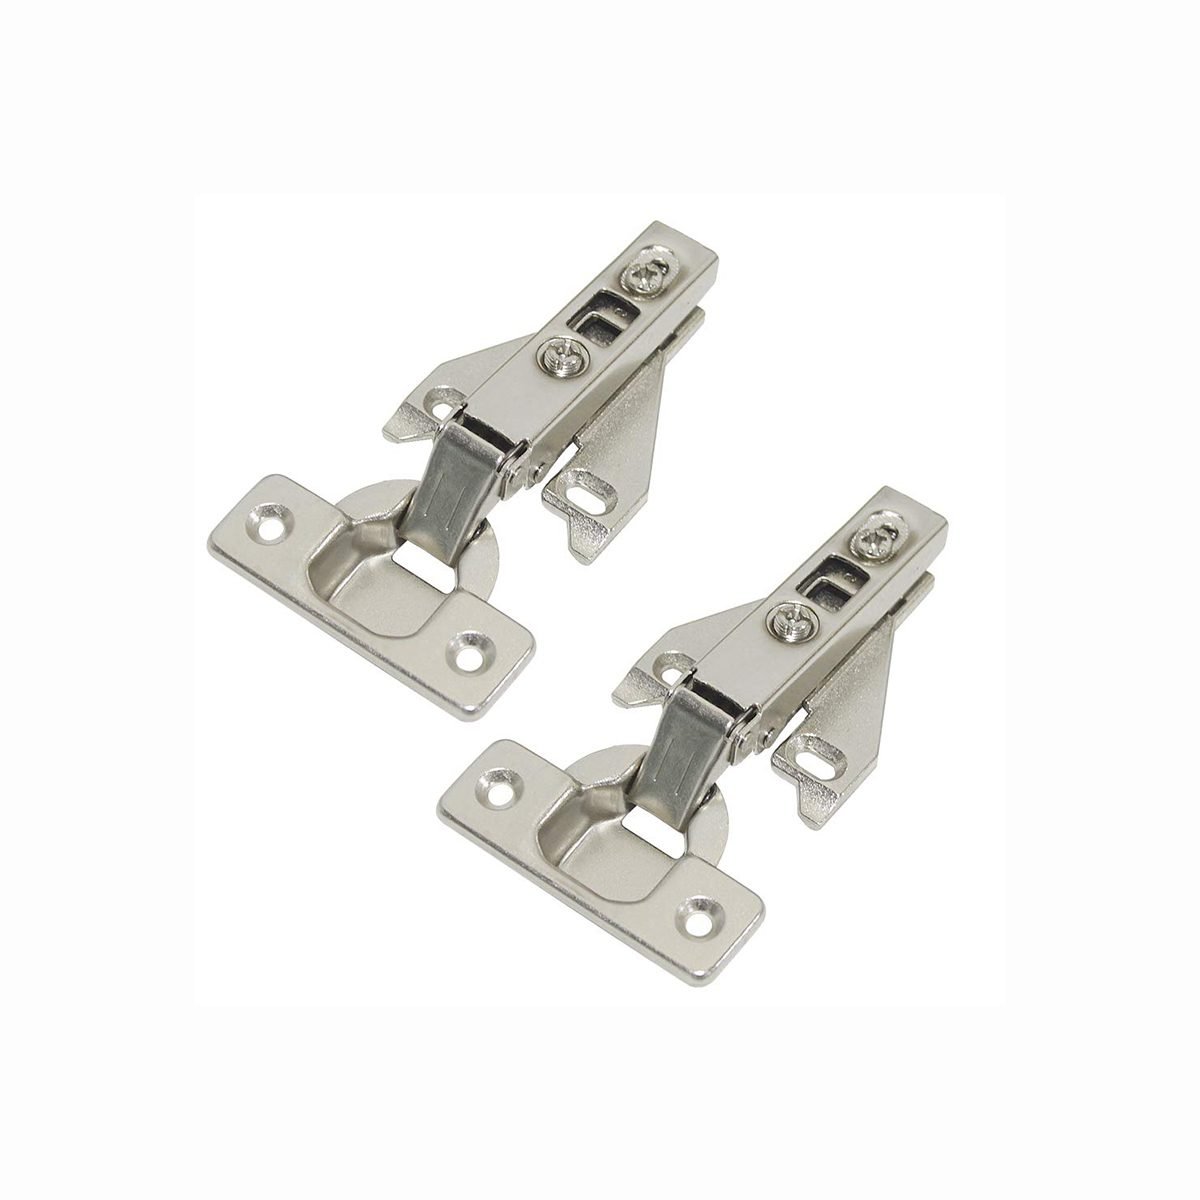 Overlay Hinges - Complete Guide To Overlay, Auto, Cabinet Hinges